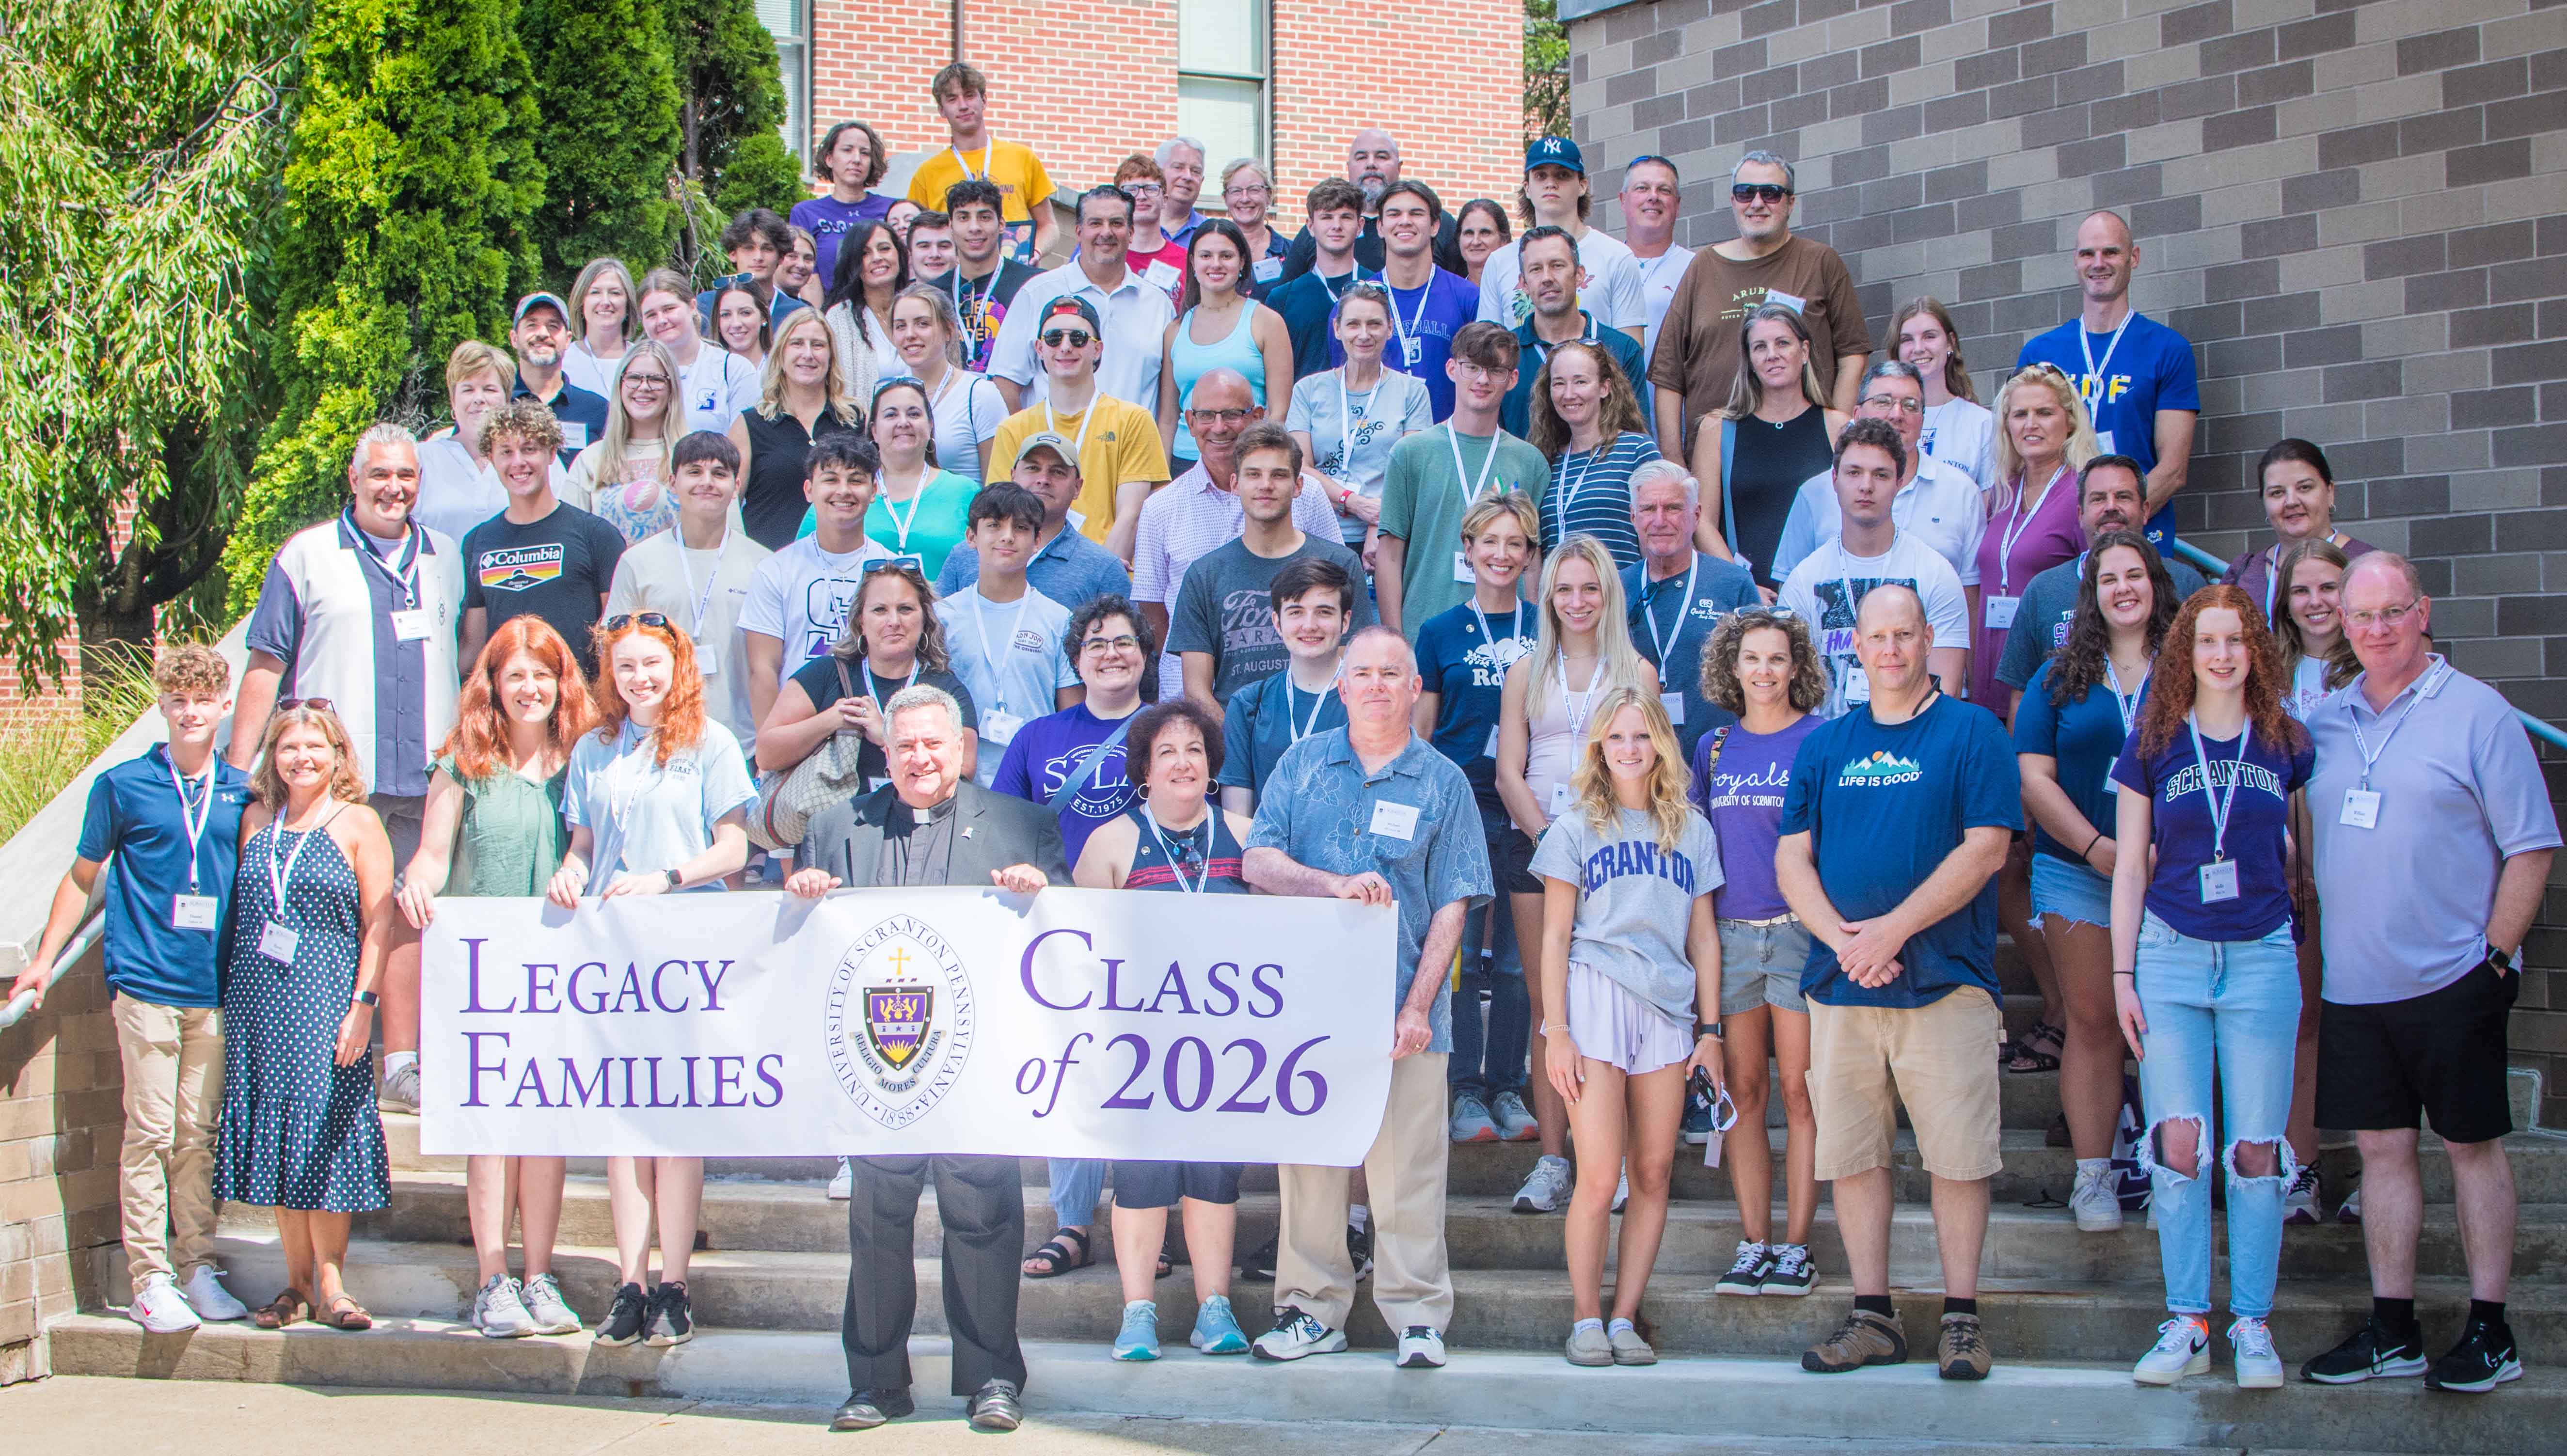 Rev. Joseph G. Marina, S.J., University president, gathers with the Legacy Families of the Class of 2026 at Brennan Hall Aug. 27.